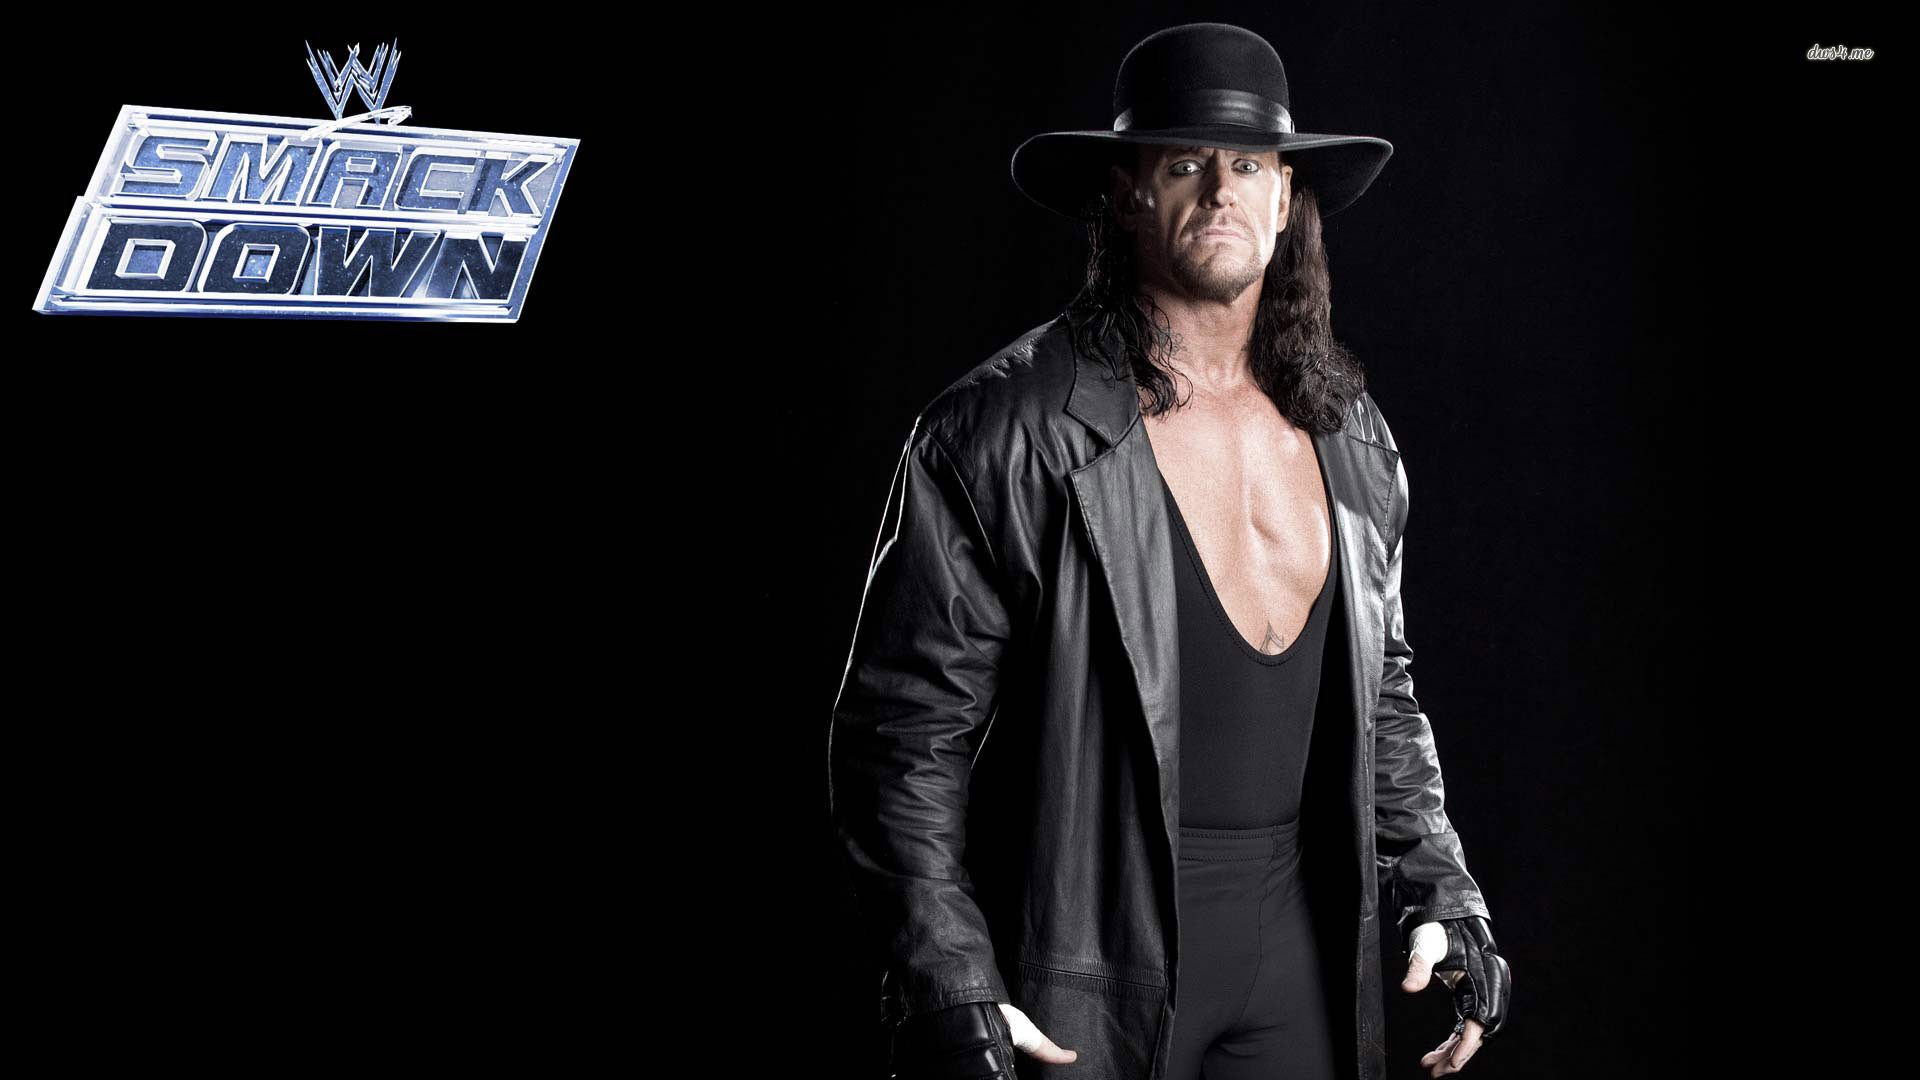 How tall is The Undertaker?